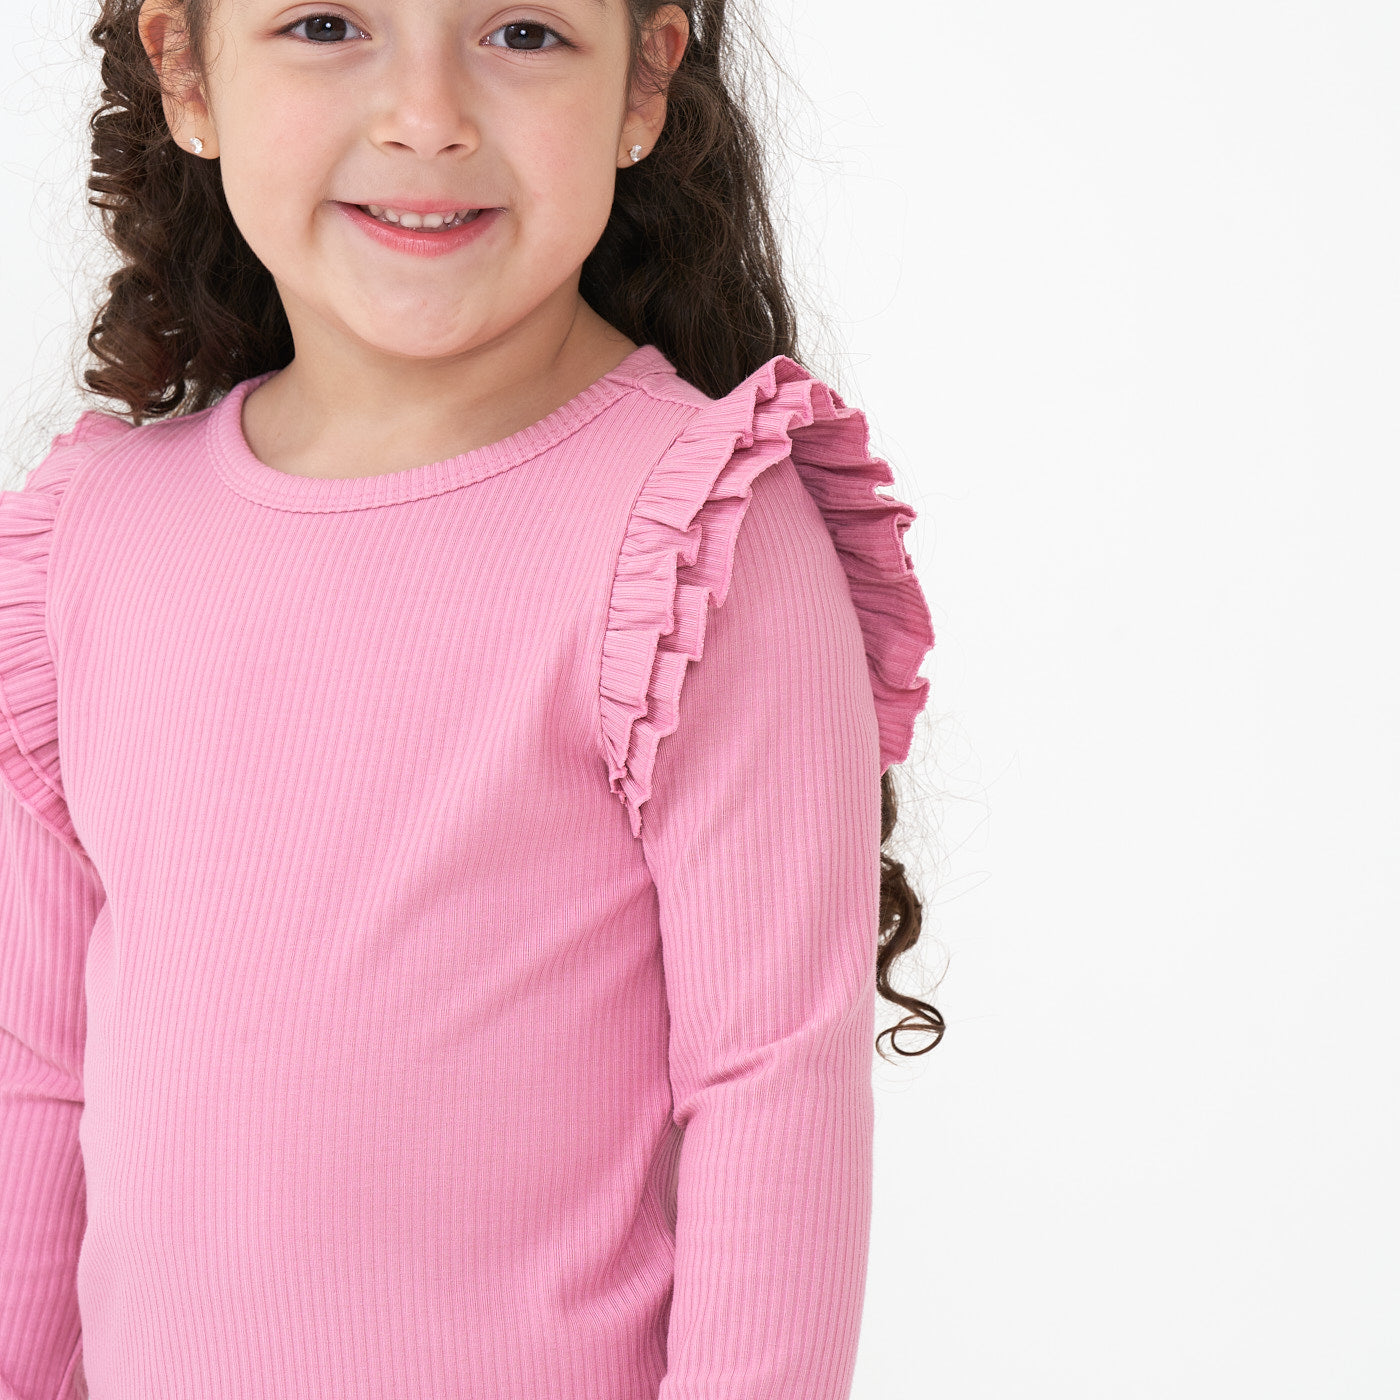 Alternate close up image of a child wearing a Garden Rose ribbed flutter tee